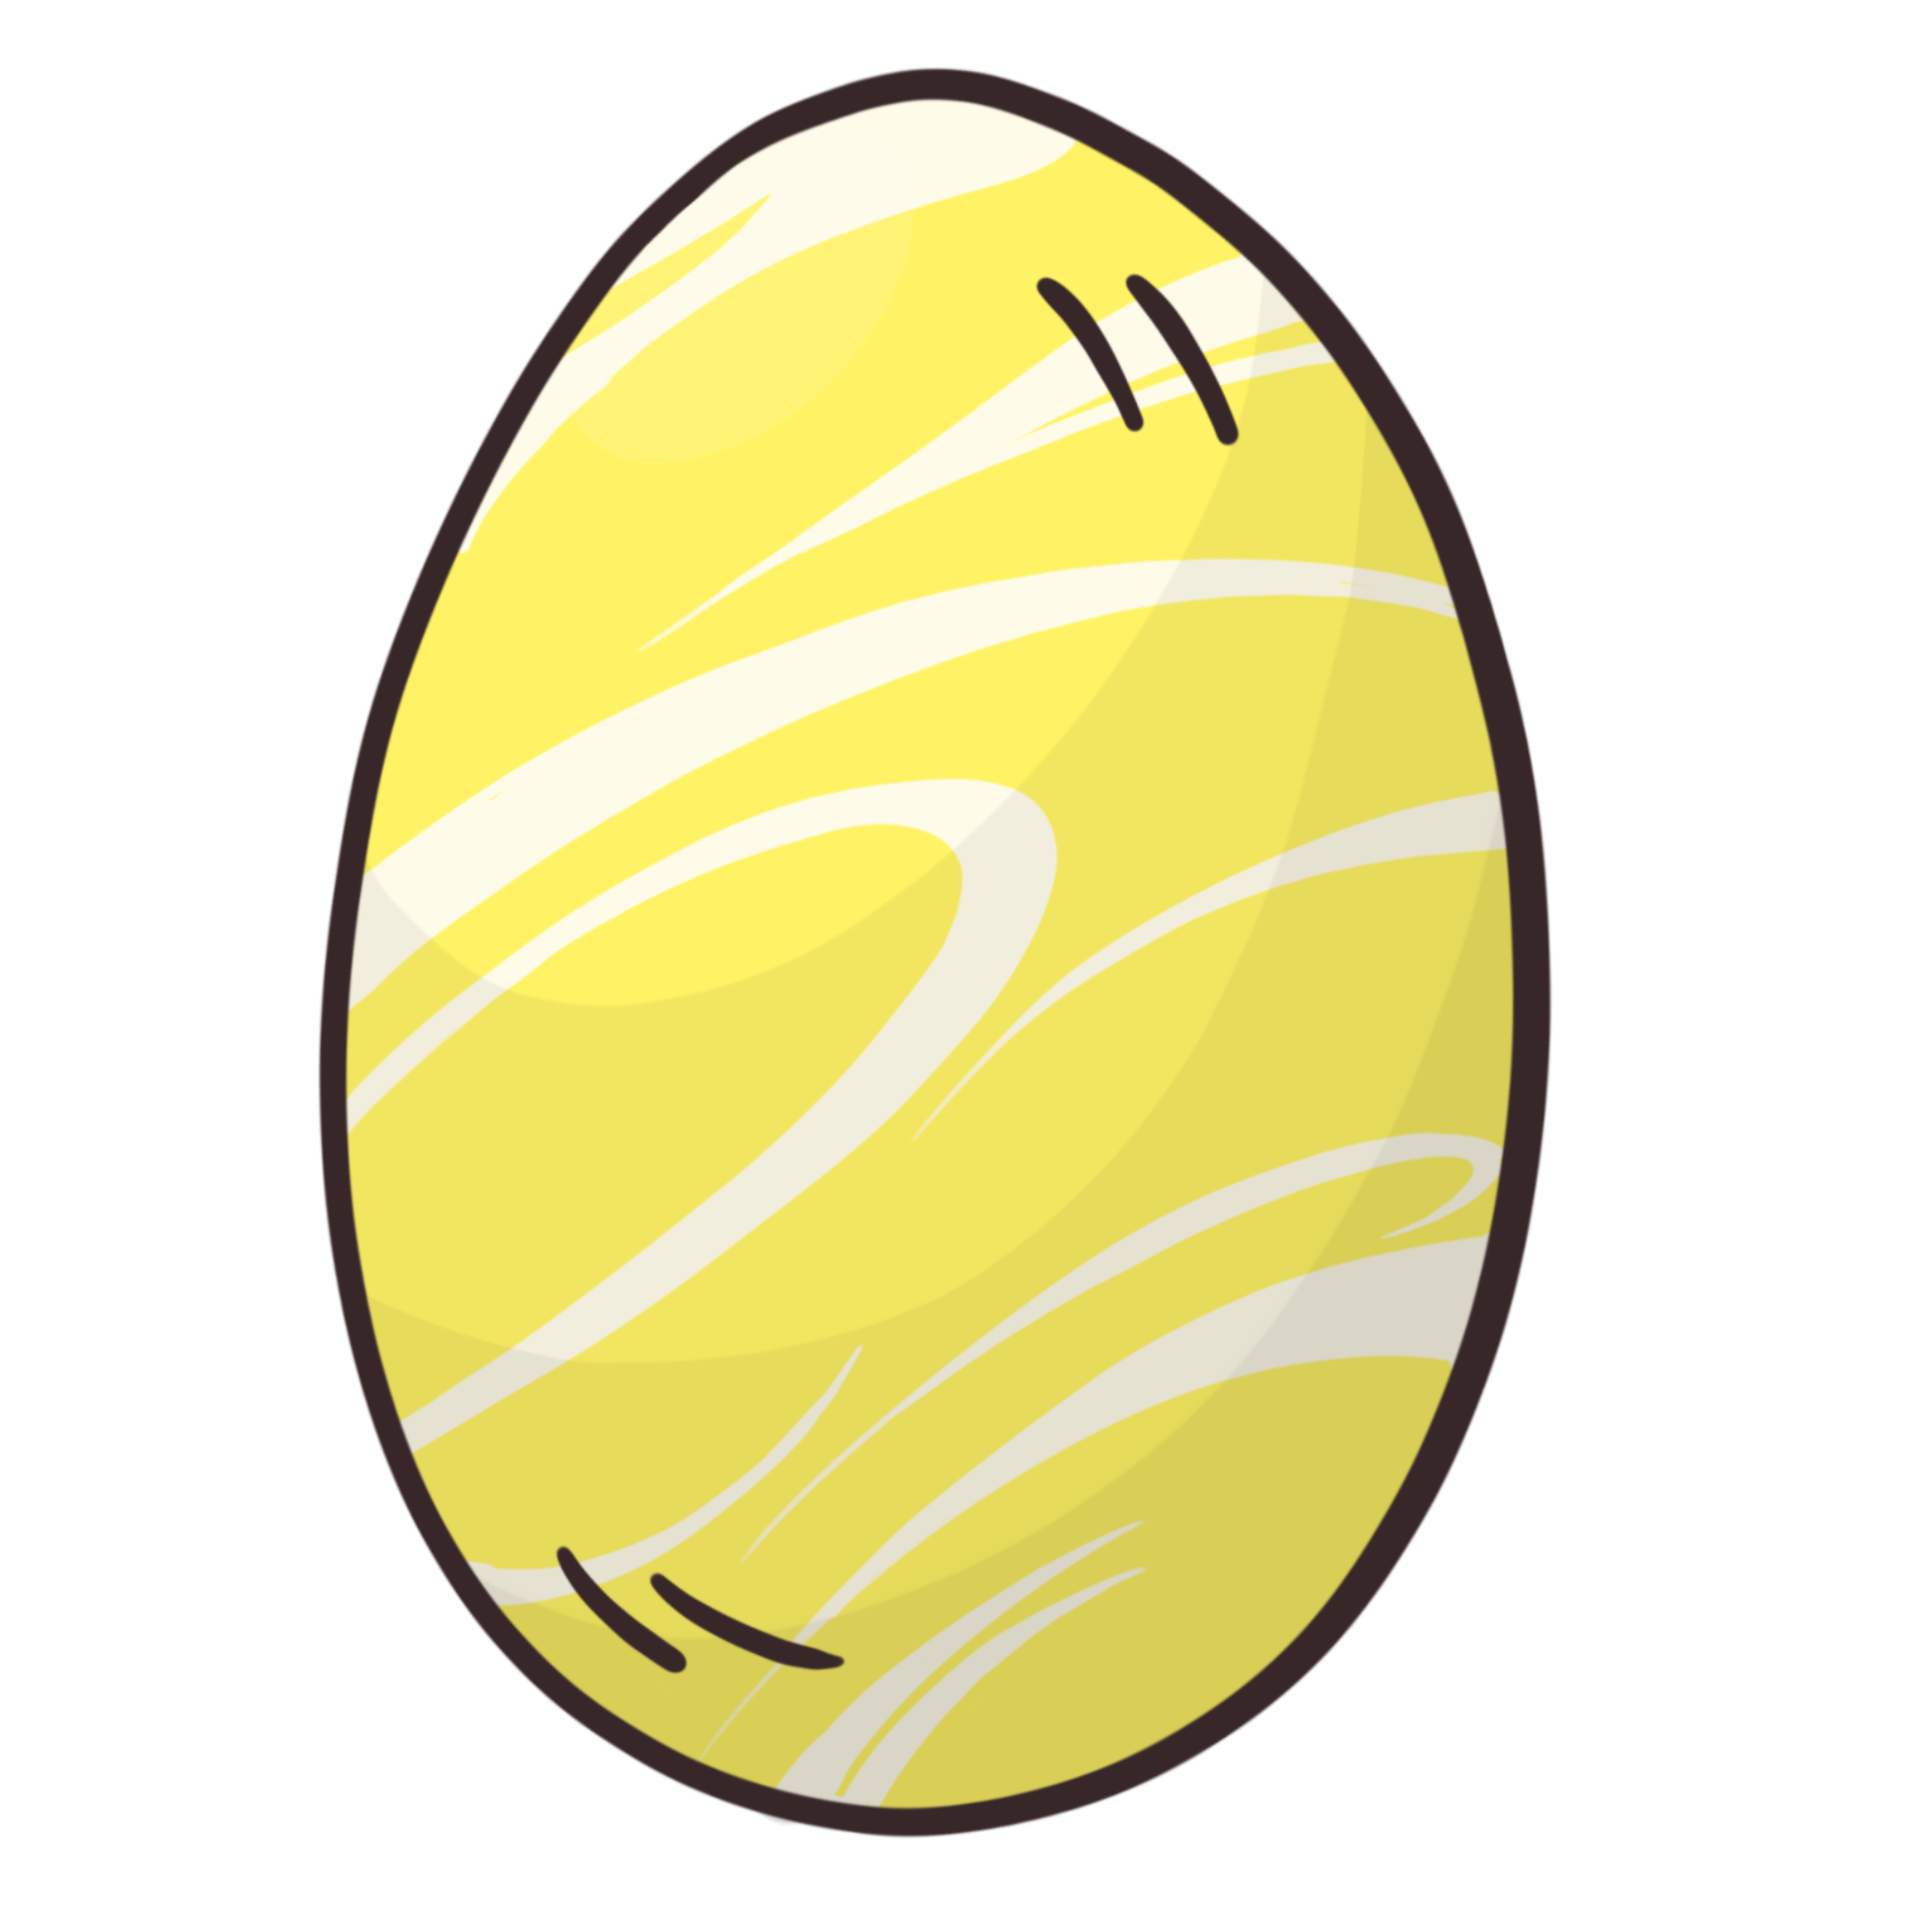 Easter eggs cartoon style. Easter eggs Paschal eggs image as cartoon  colorful style for the Christian feast of Easter, which celebrates the  resurrection of Jesus 16398100 PNG